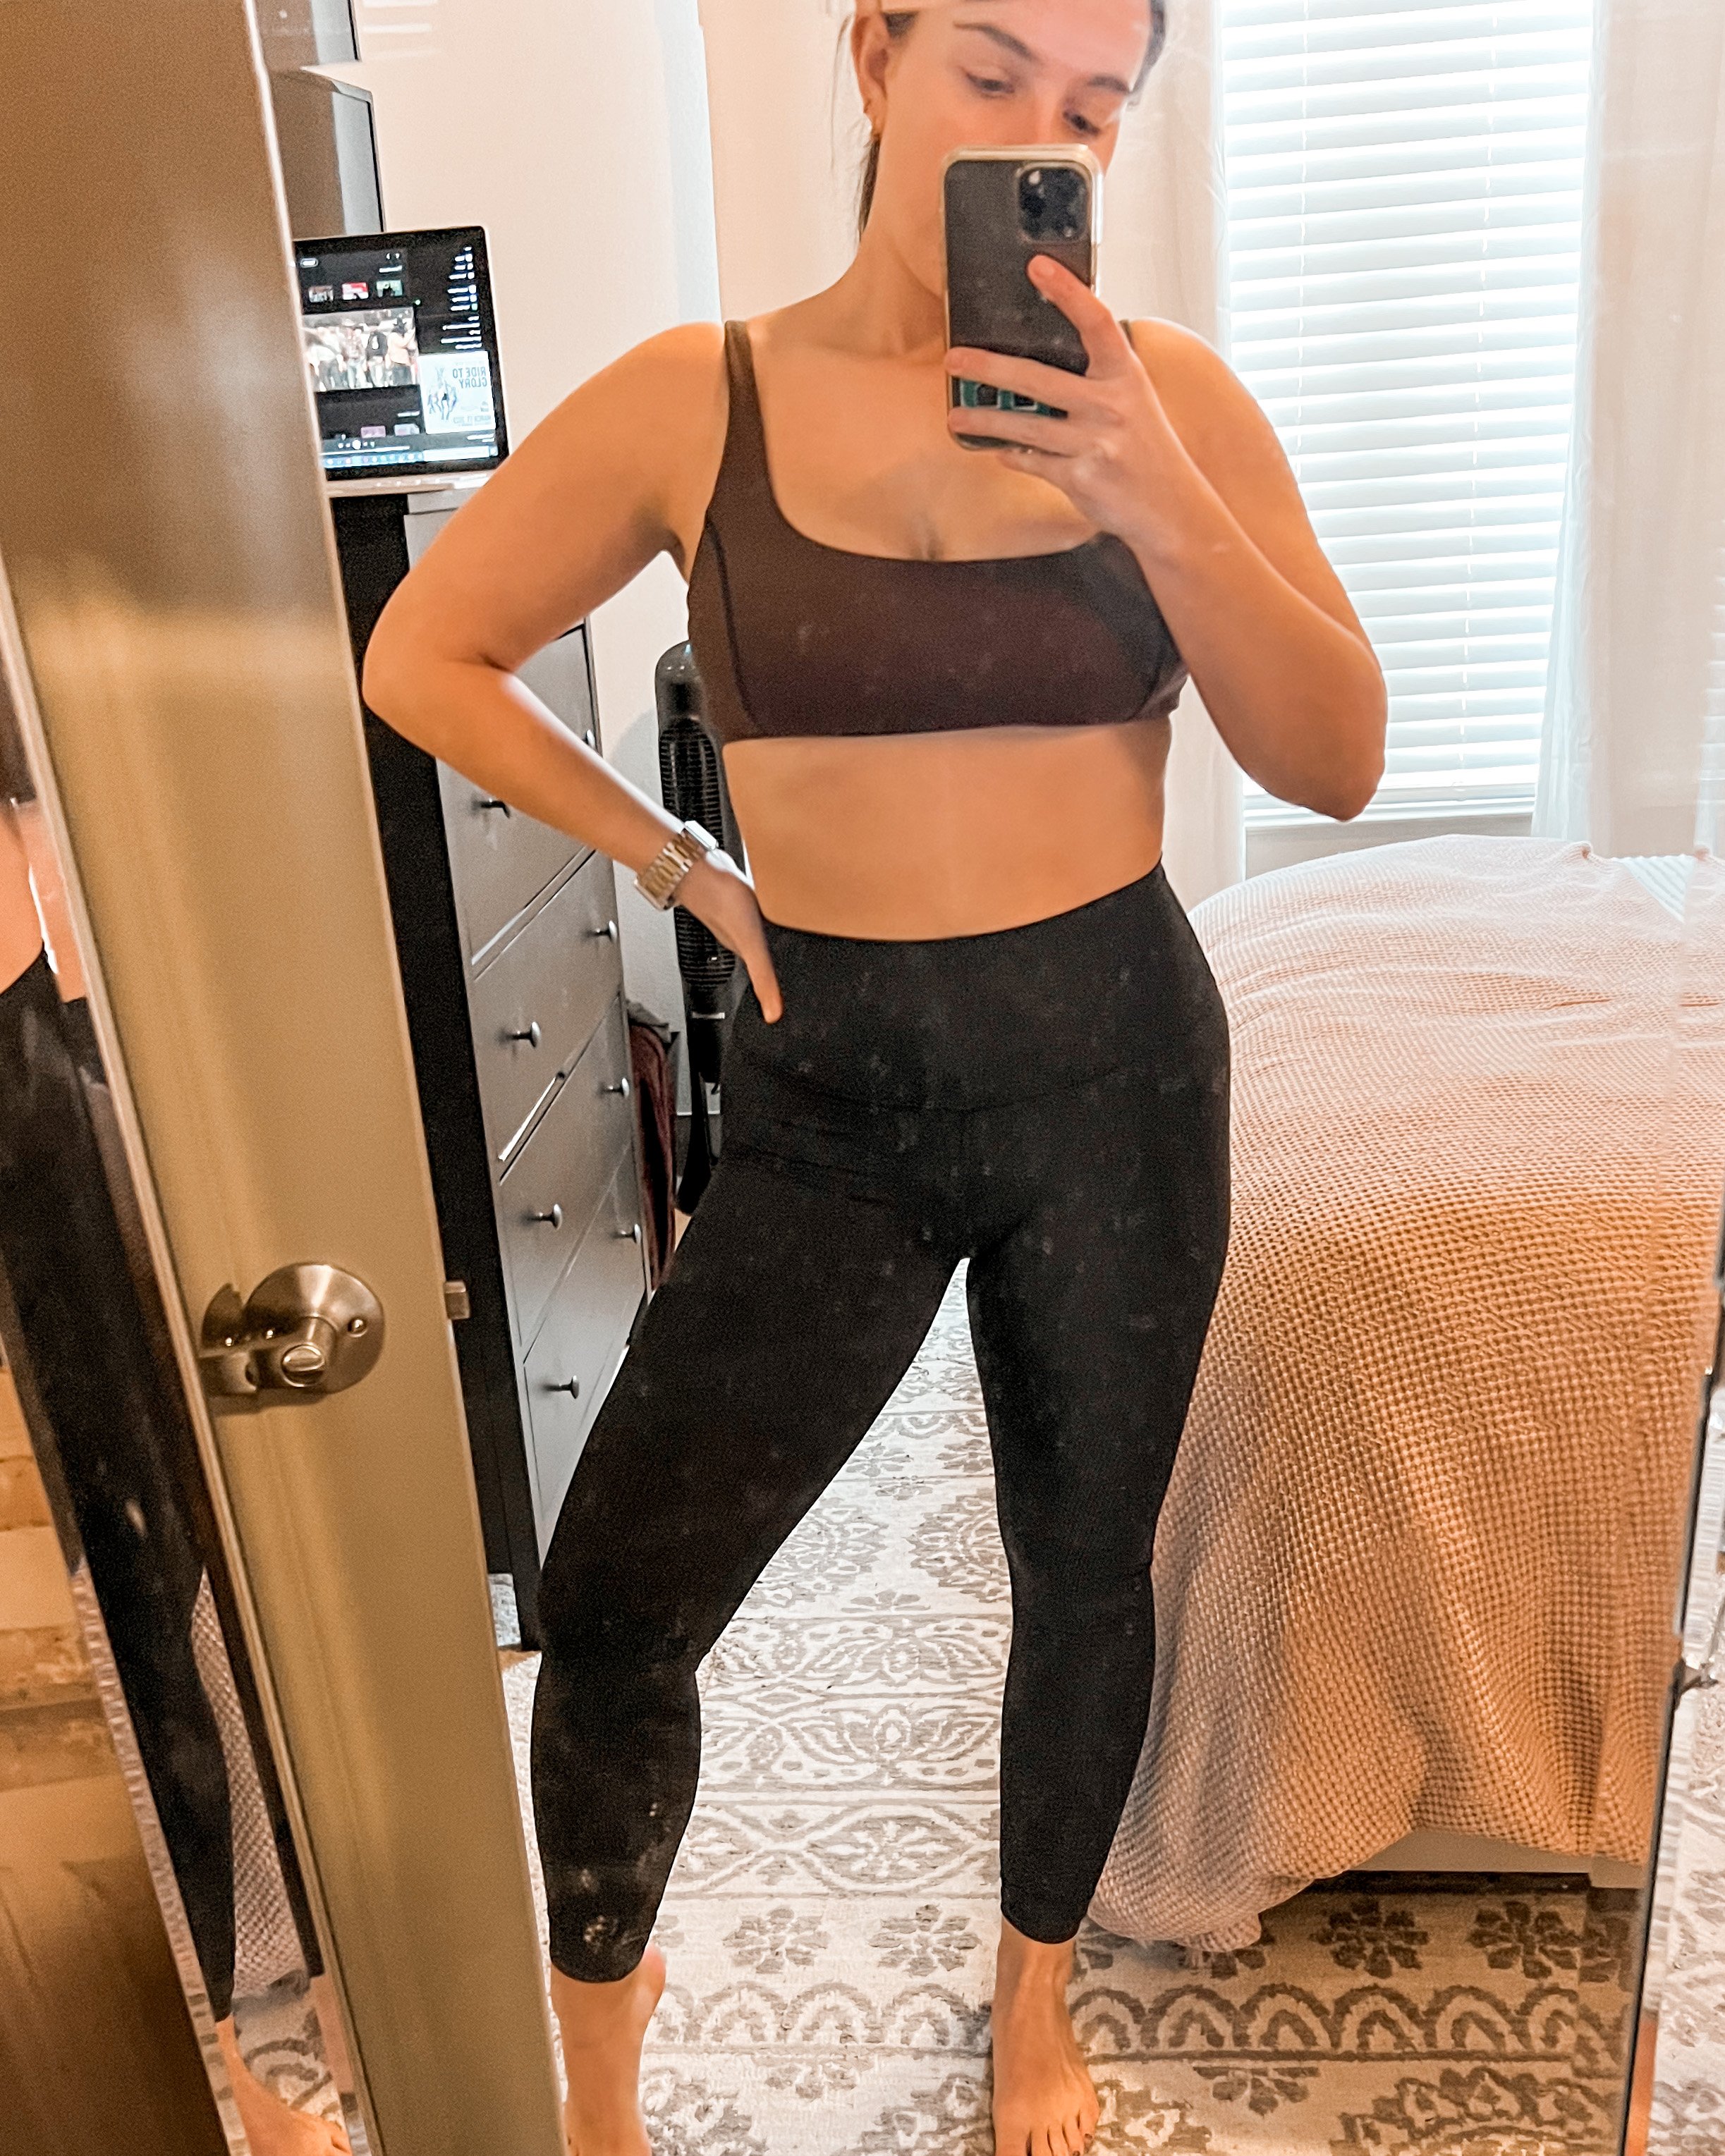 Are Lululemon Skinny Groove Pants Reversible? Let's Find Out